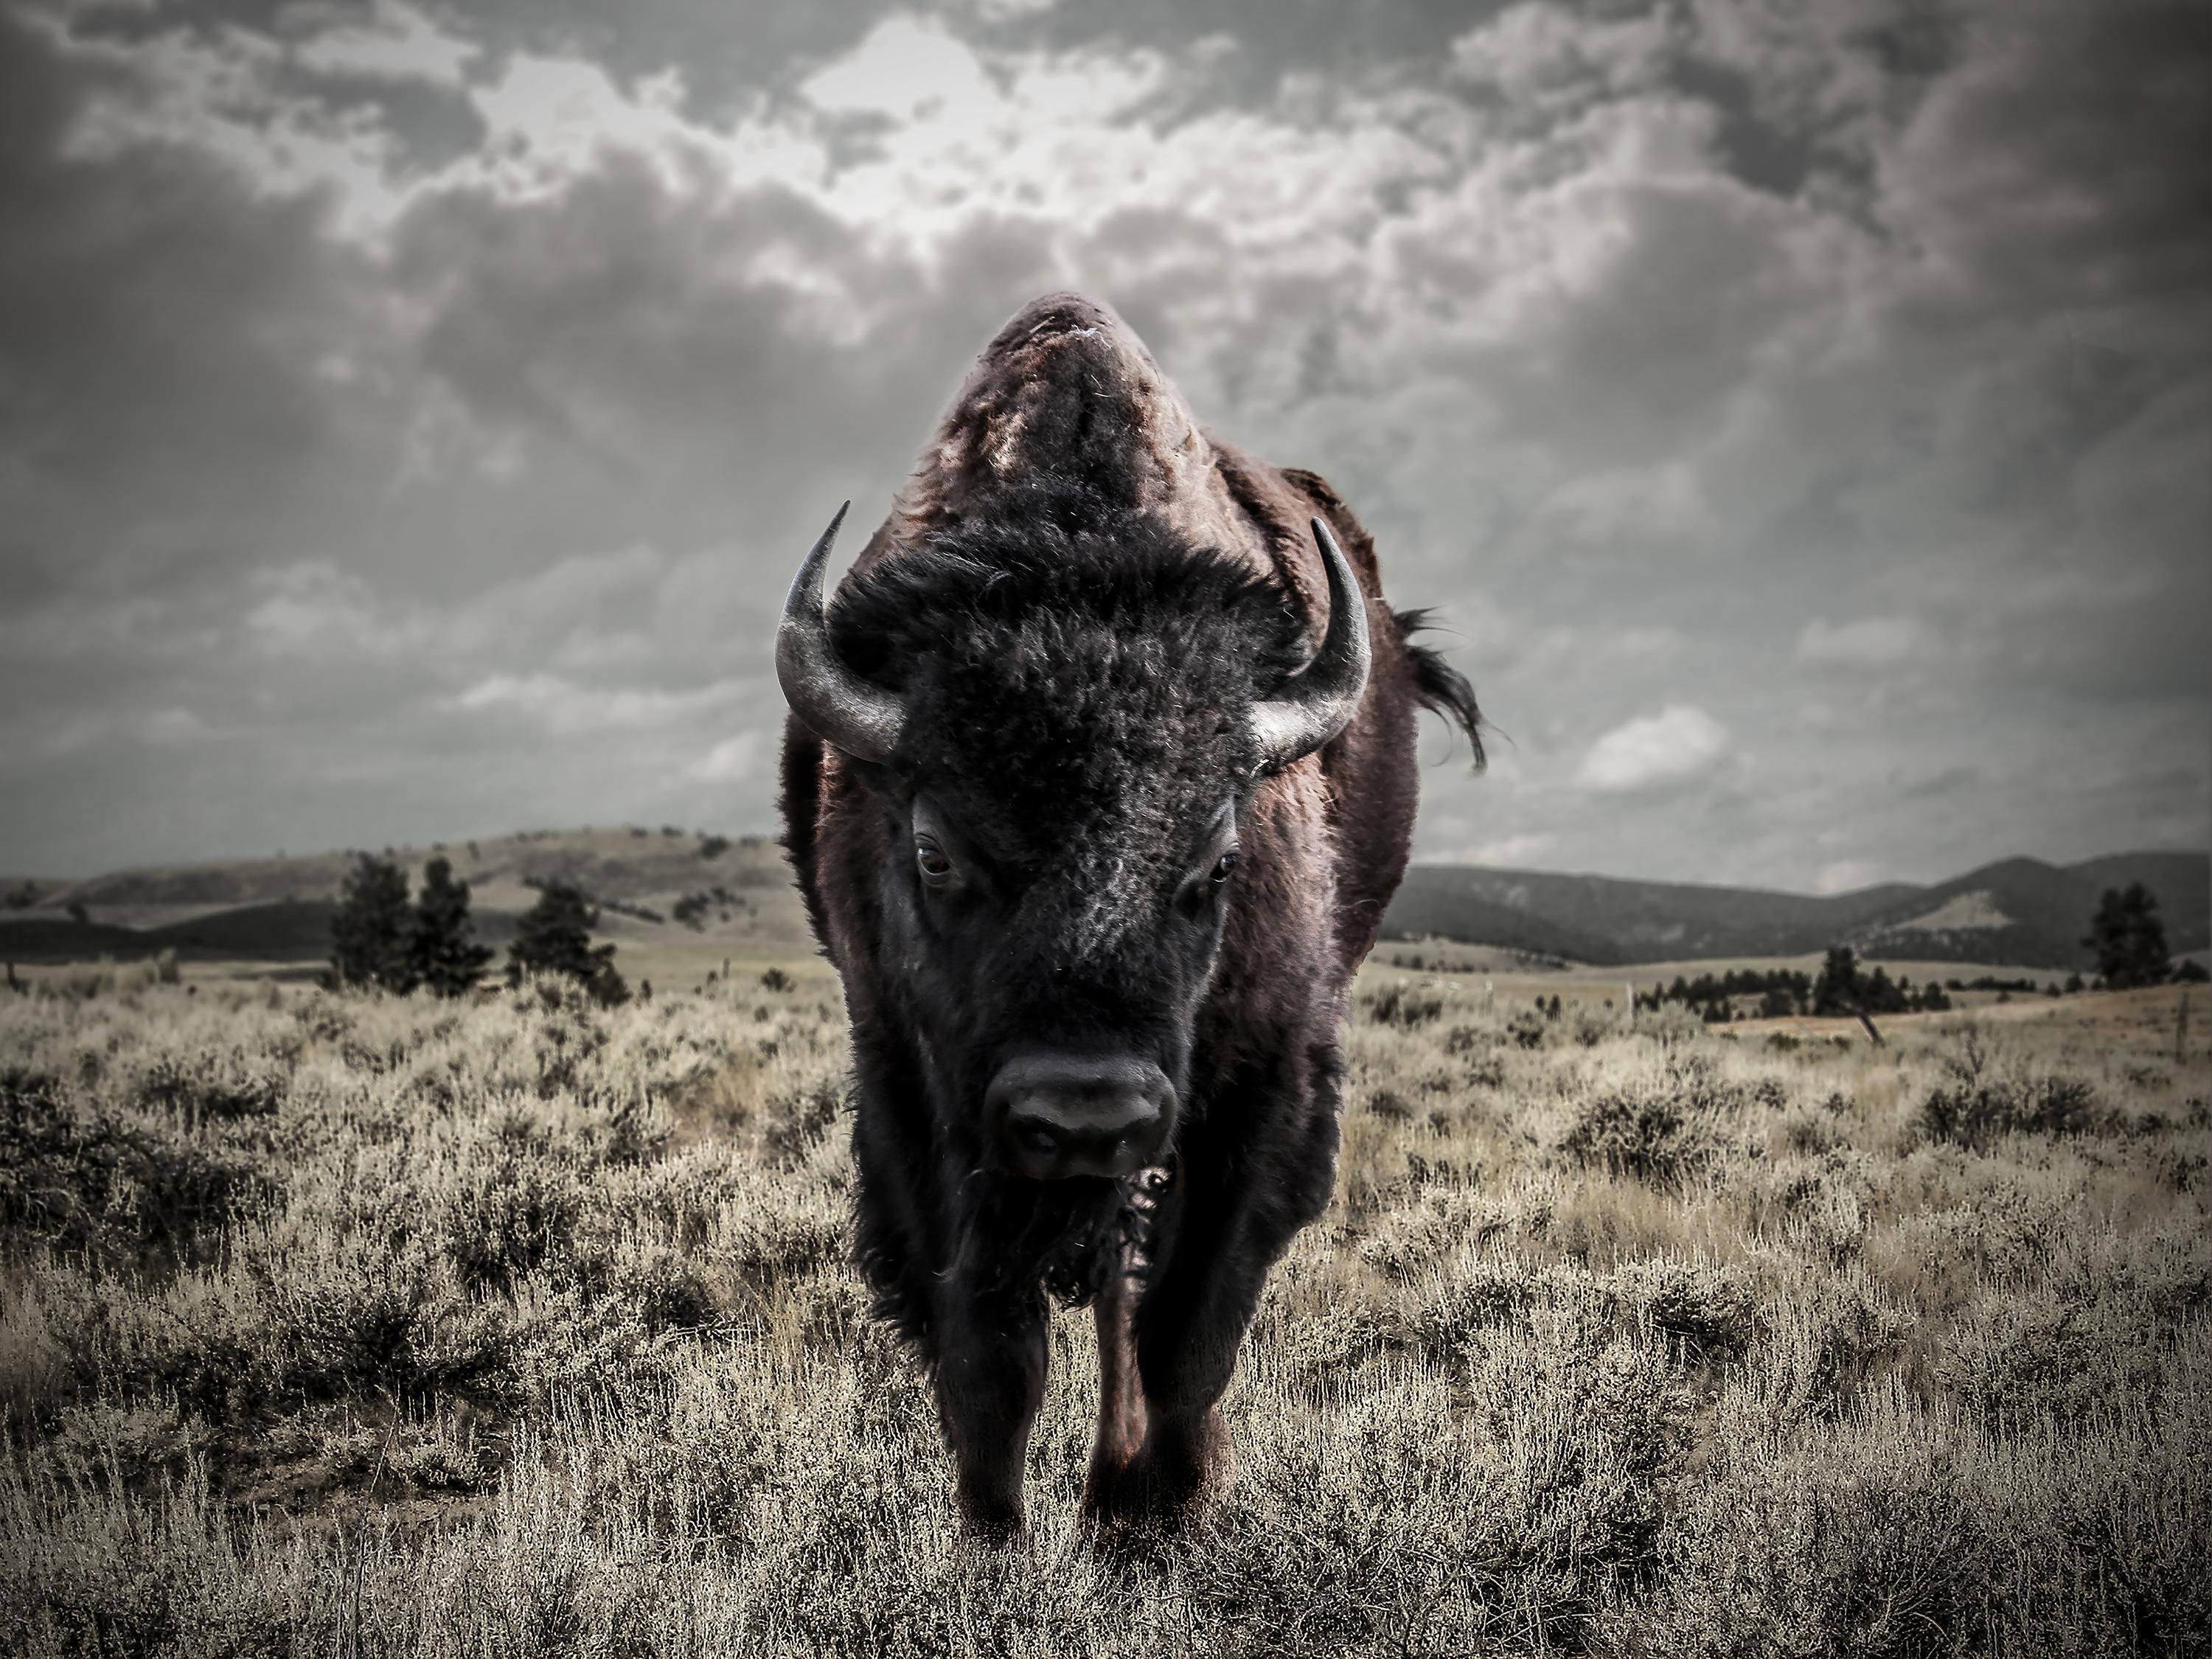 Shane Russeck Animal Print - "Bison" 20x30 -  Photograph, Bison Photography Unsigned Print Buffalo